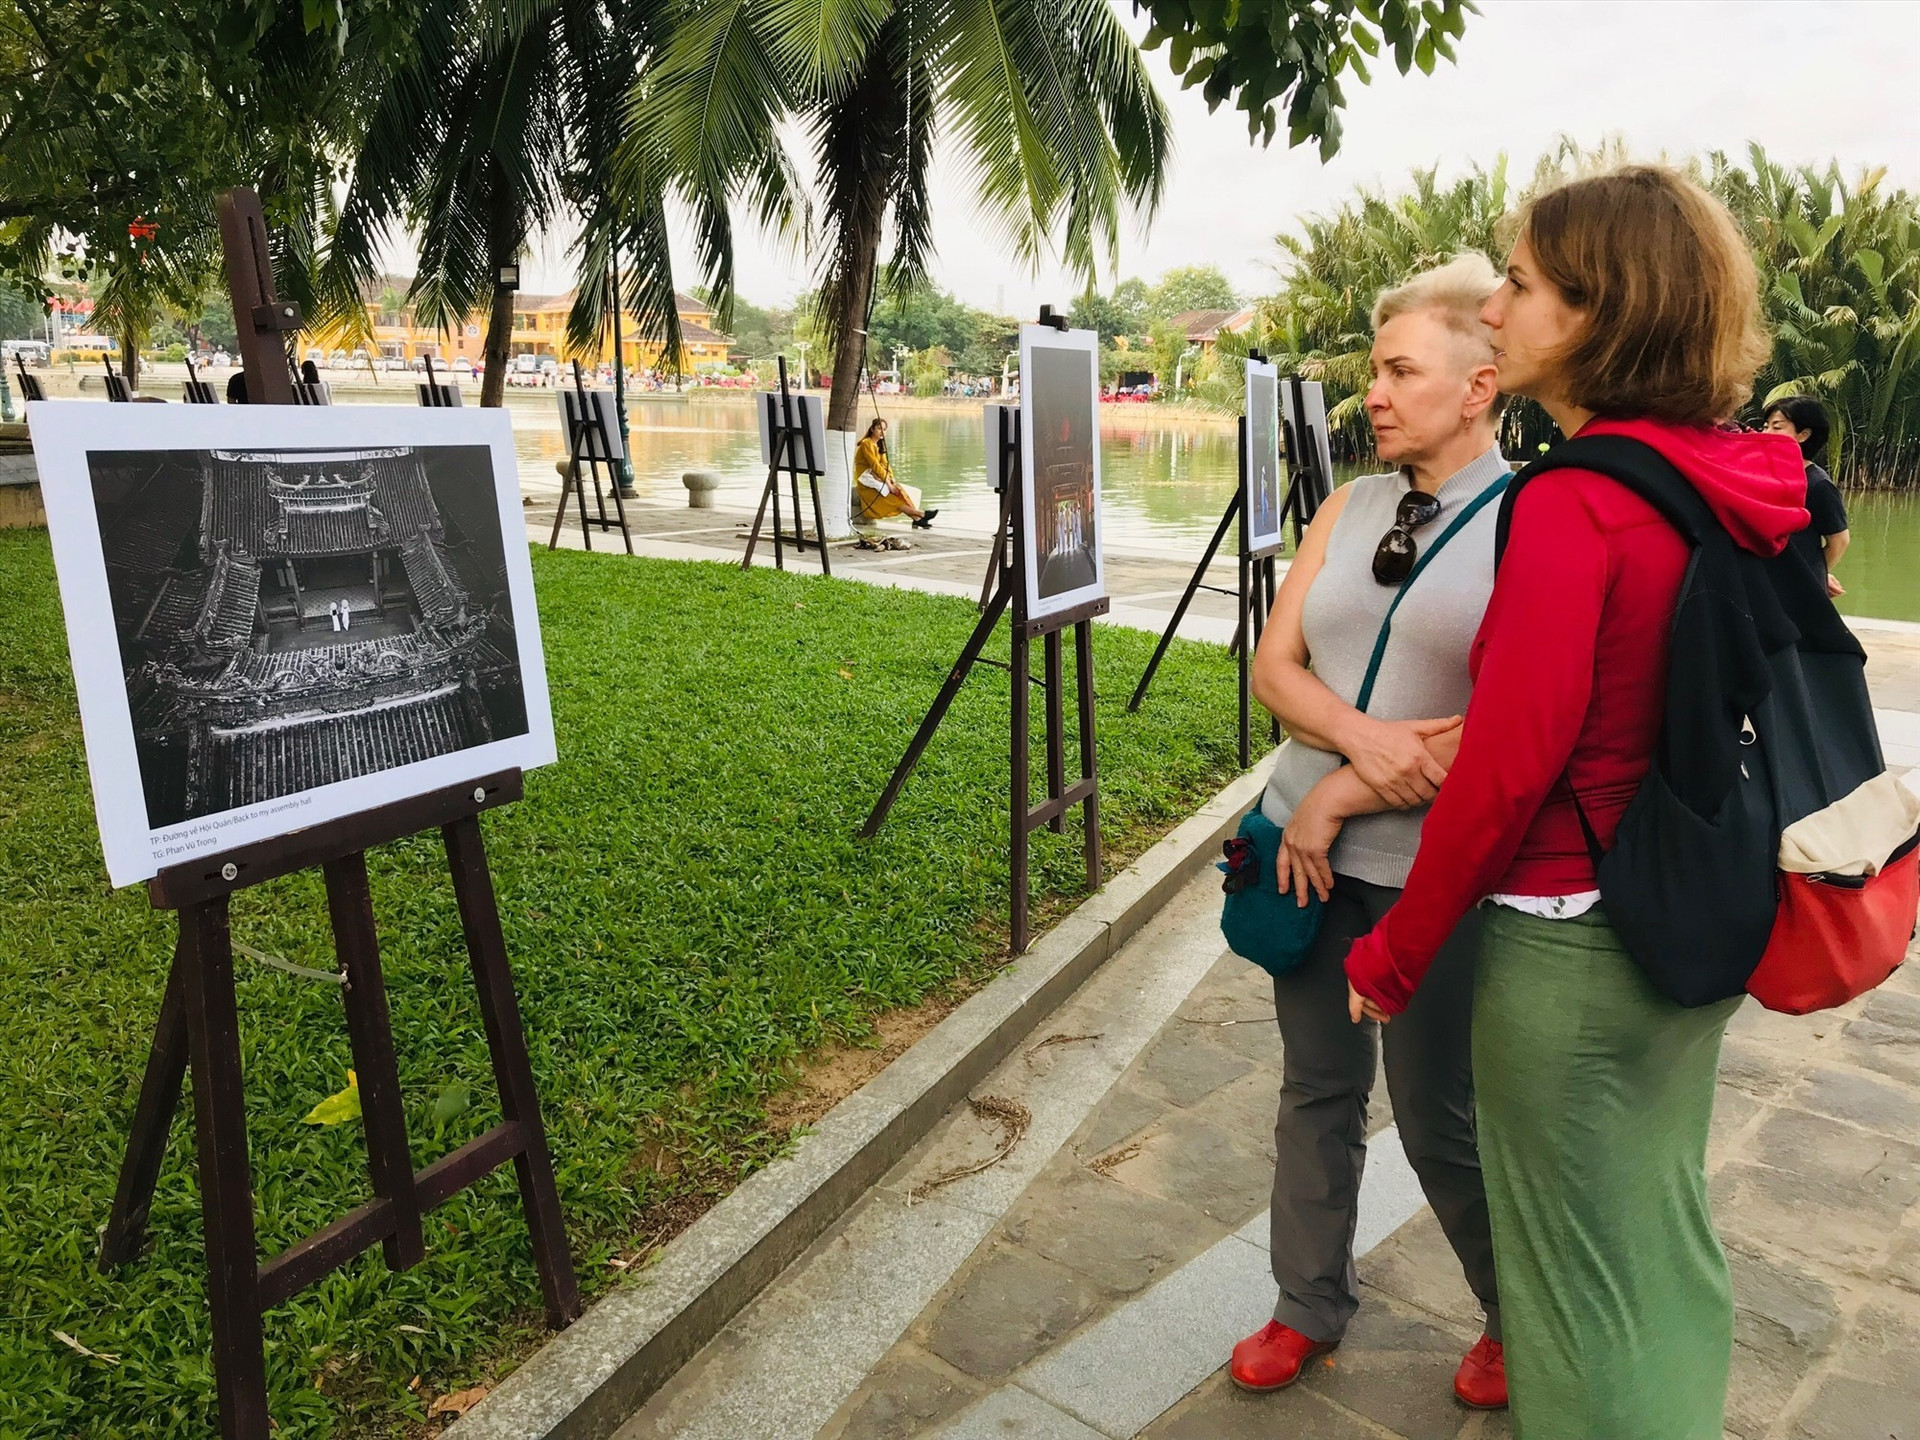 Foreign tourists come back to Vietnam